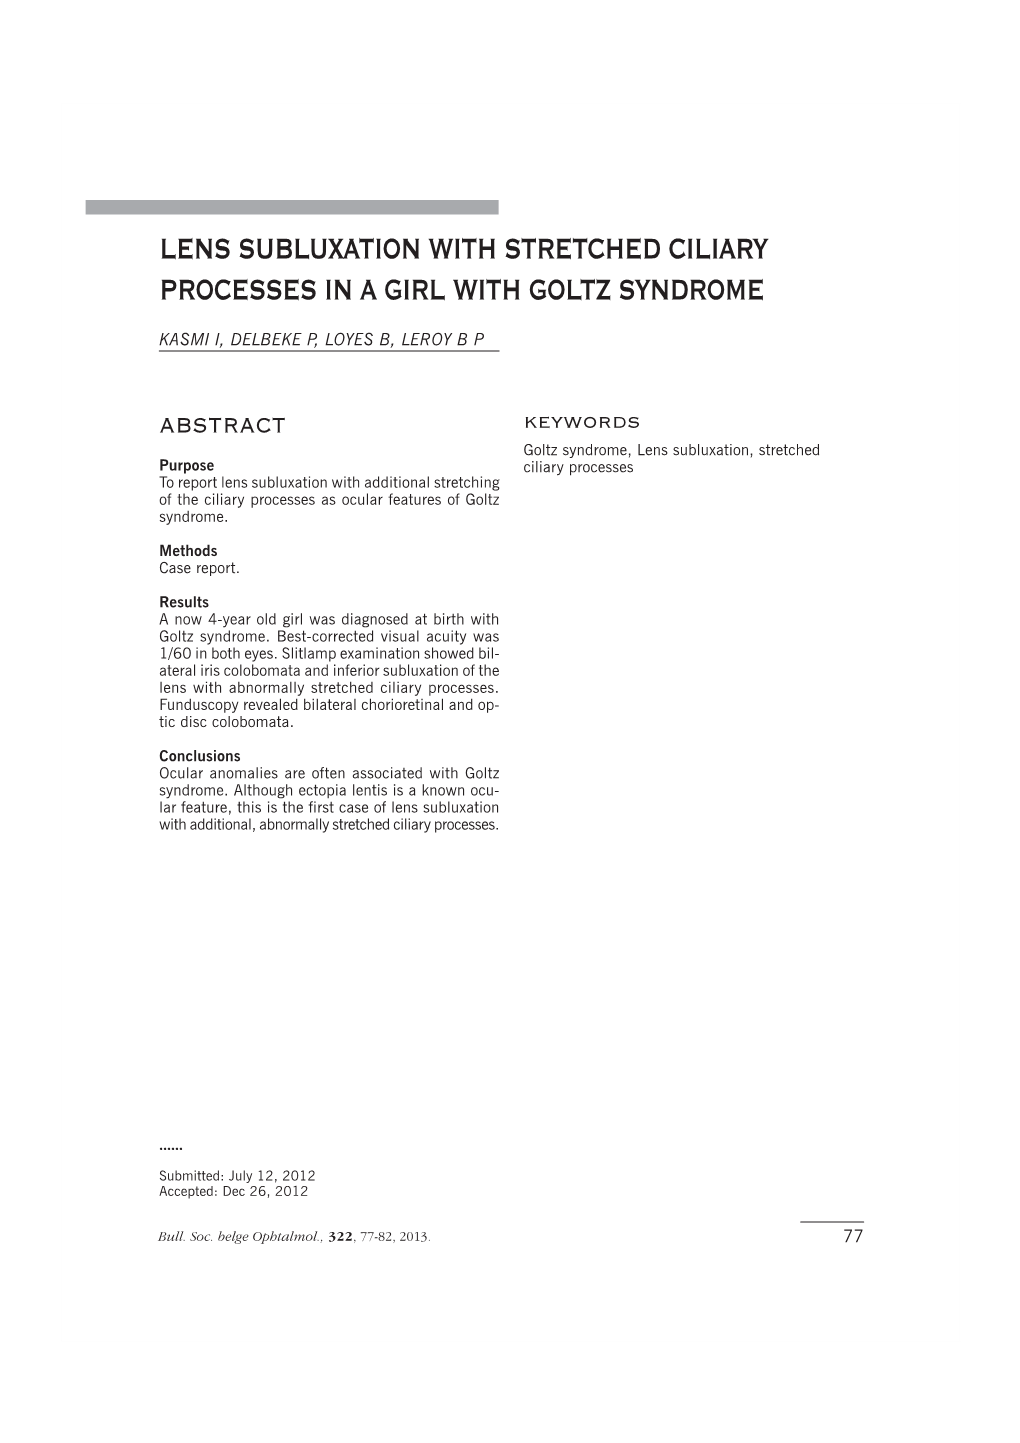 Lens Subluxation with Stretched Ciliary Processes in a Girl with Goltz Syndrome